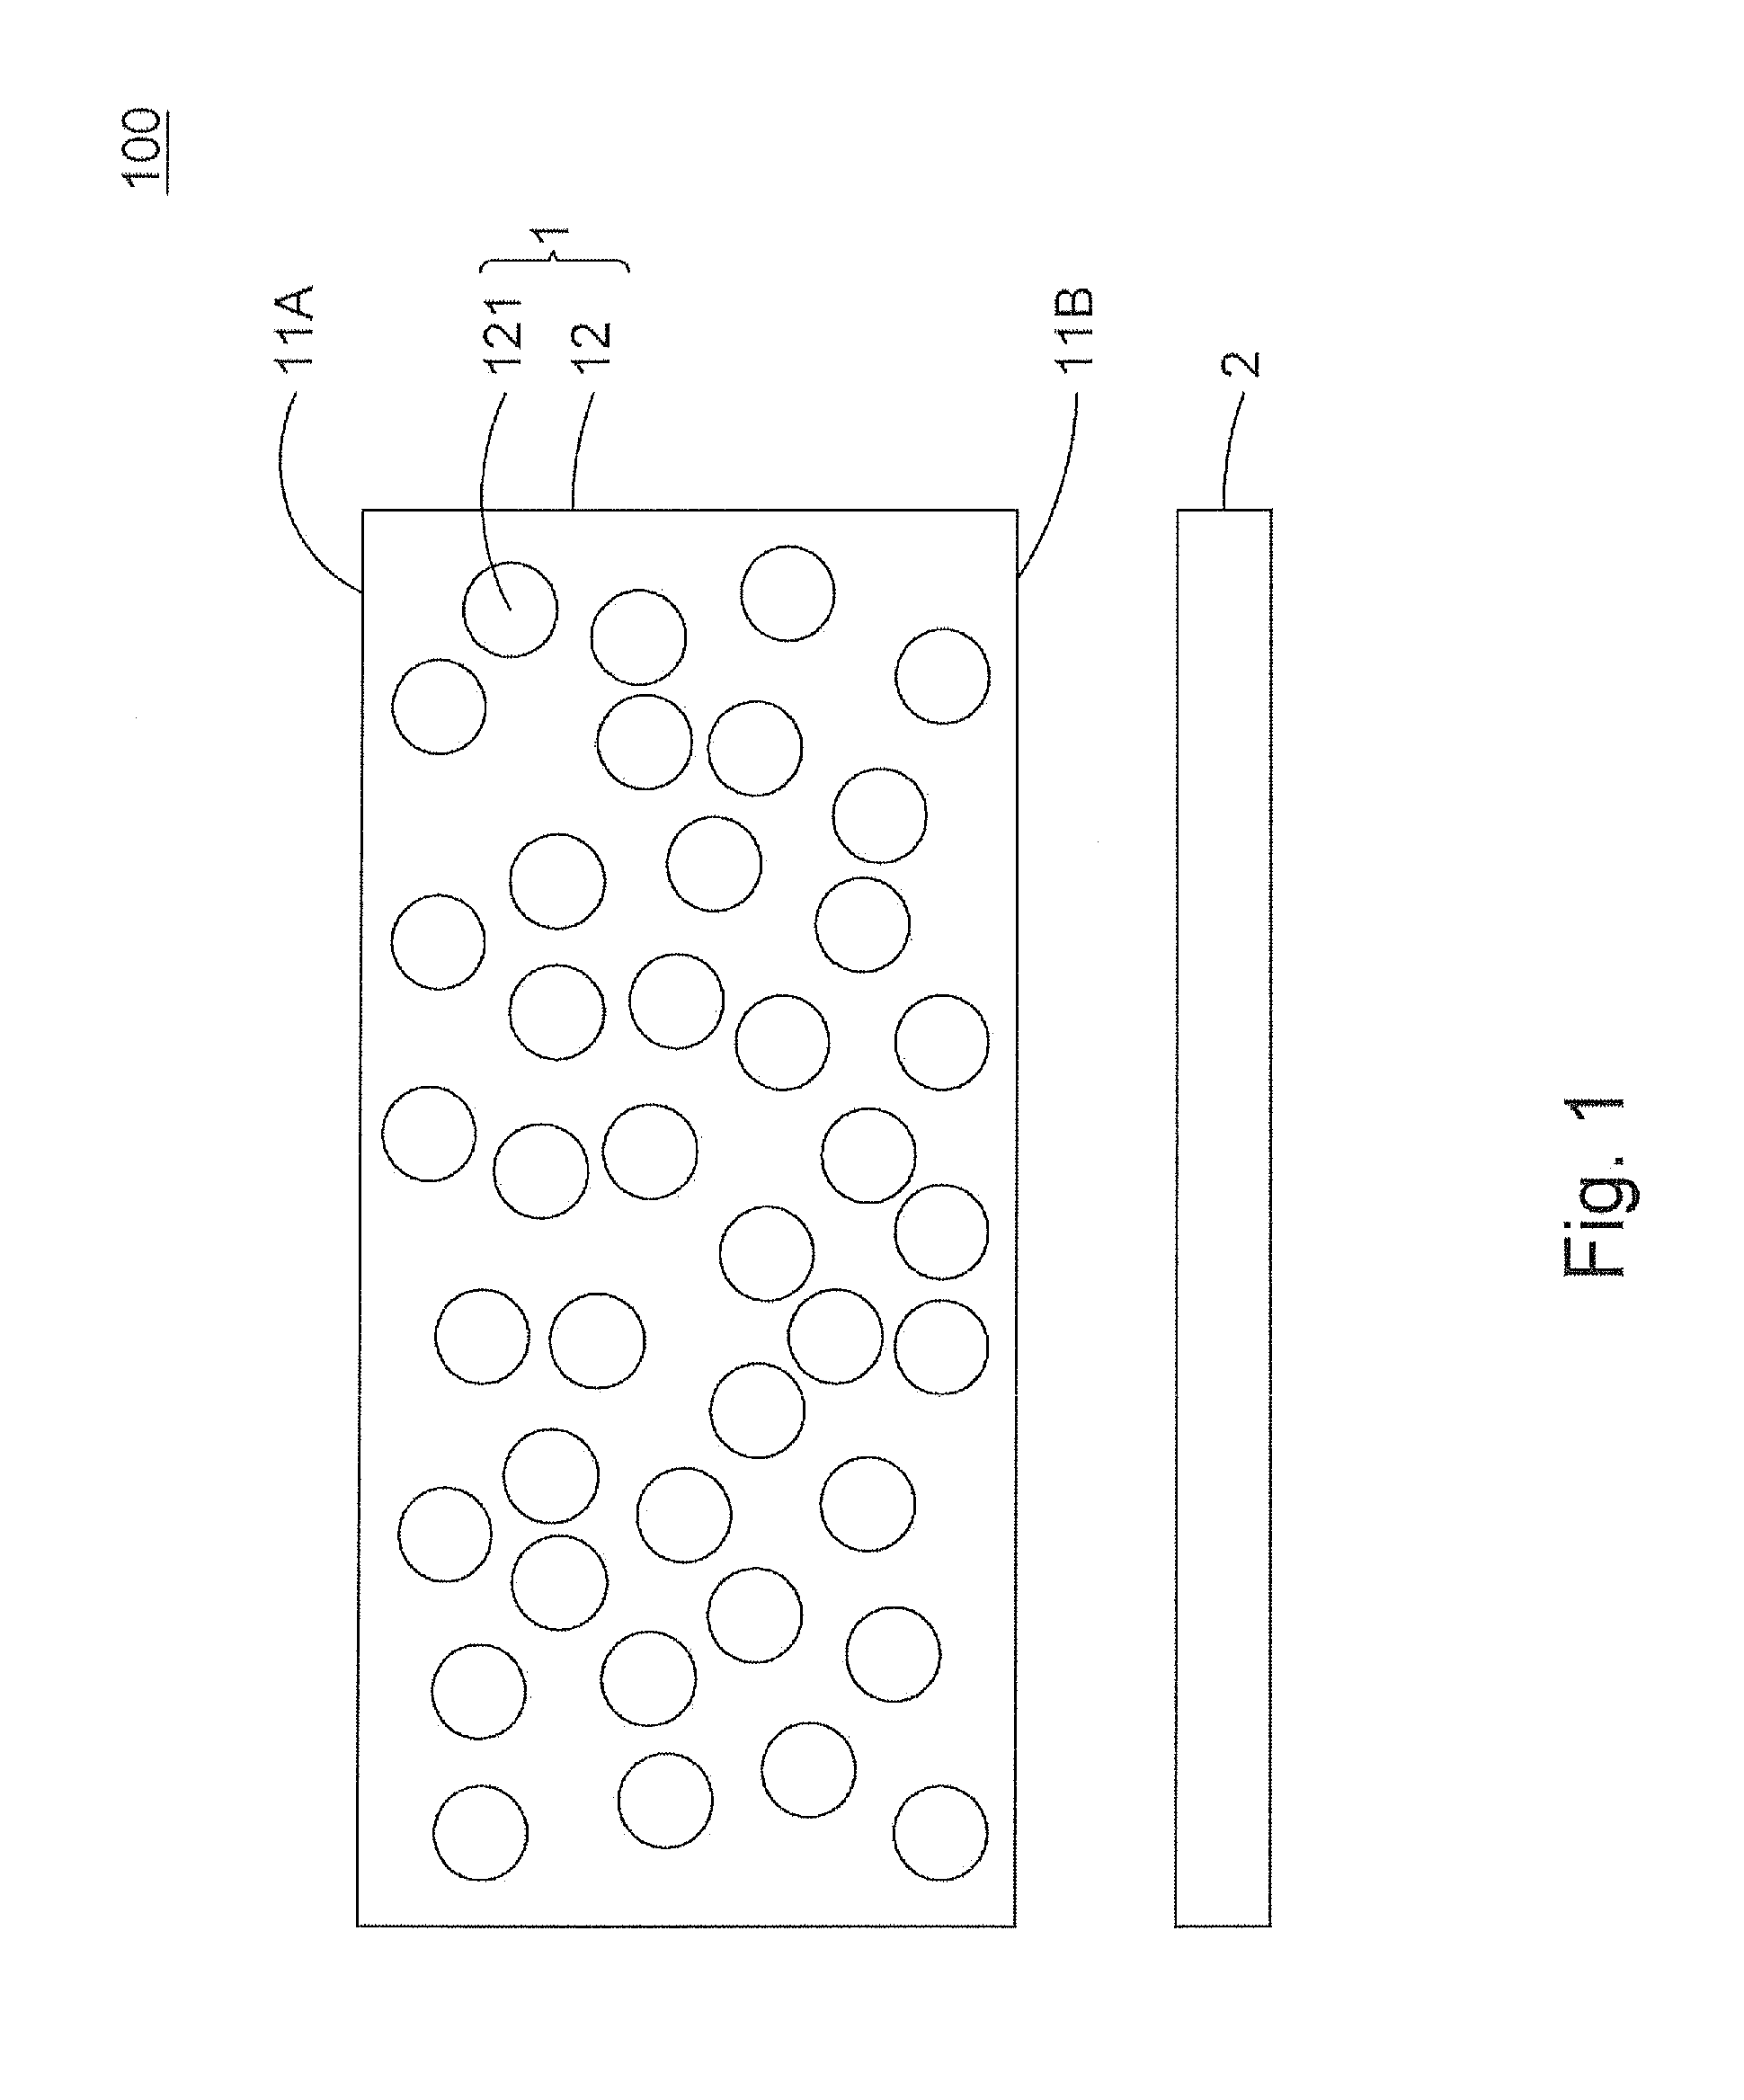 Polymeric Electret Film and Method of Manufacturing the Same